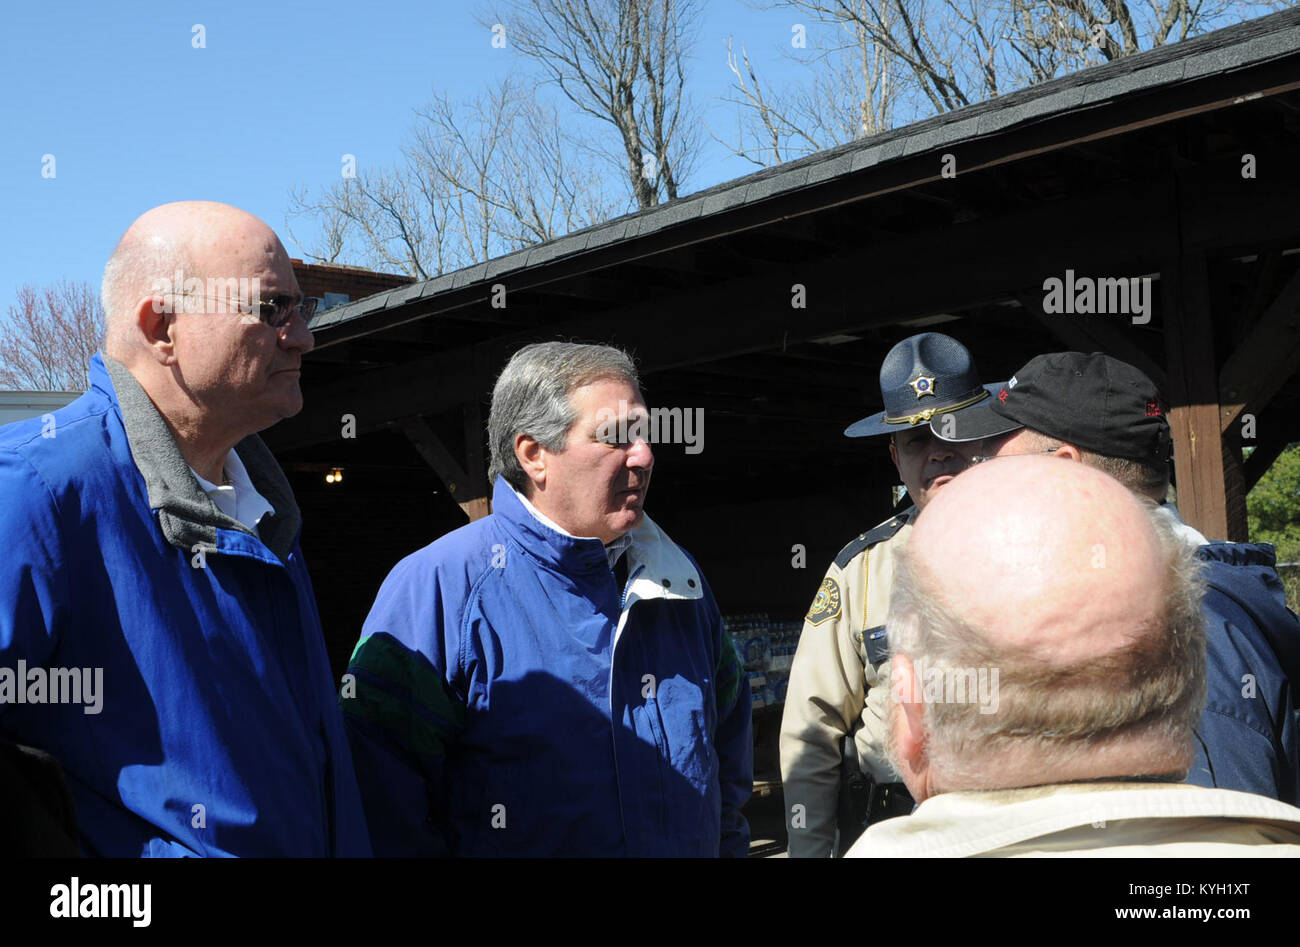 Kentucky's Lt. Gov. Jerry Abramson and State Sen. Tom Jensen talk with locals in East Bernstadt, Ky. about the clean-up on Mar. 3. (Photo by Spc. Brandy Mort, 133rd Mobile Public Affairs Detachment, Kentucky National Guard) Stock Photo